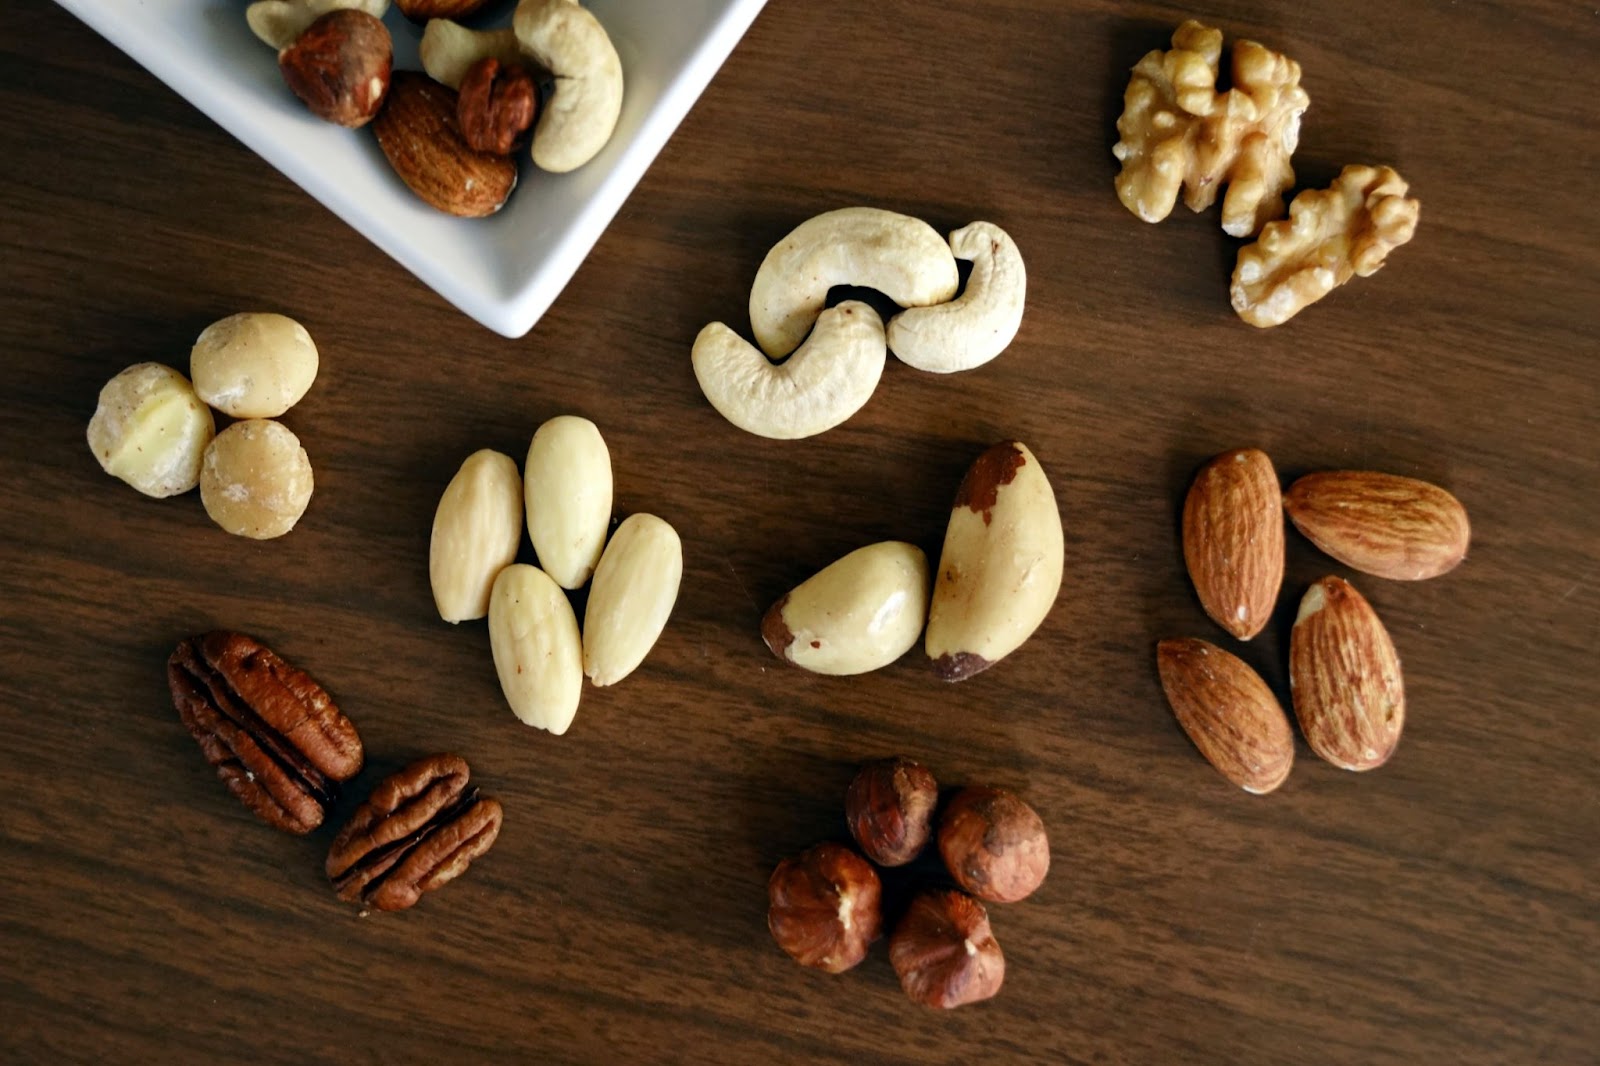 An assortment of nuts